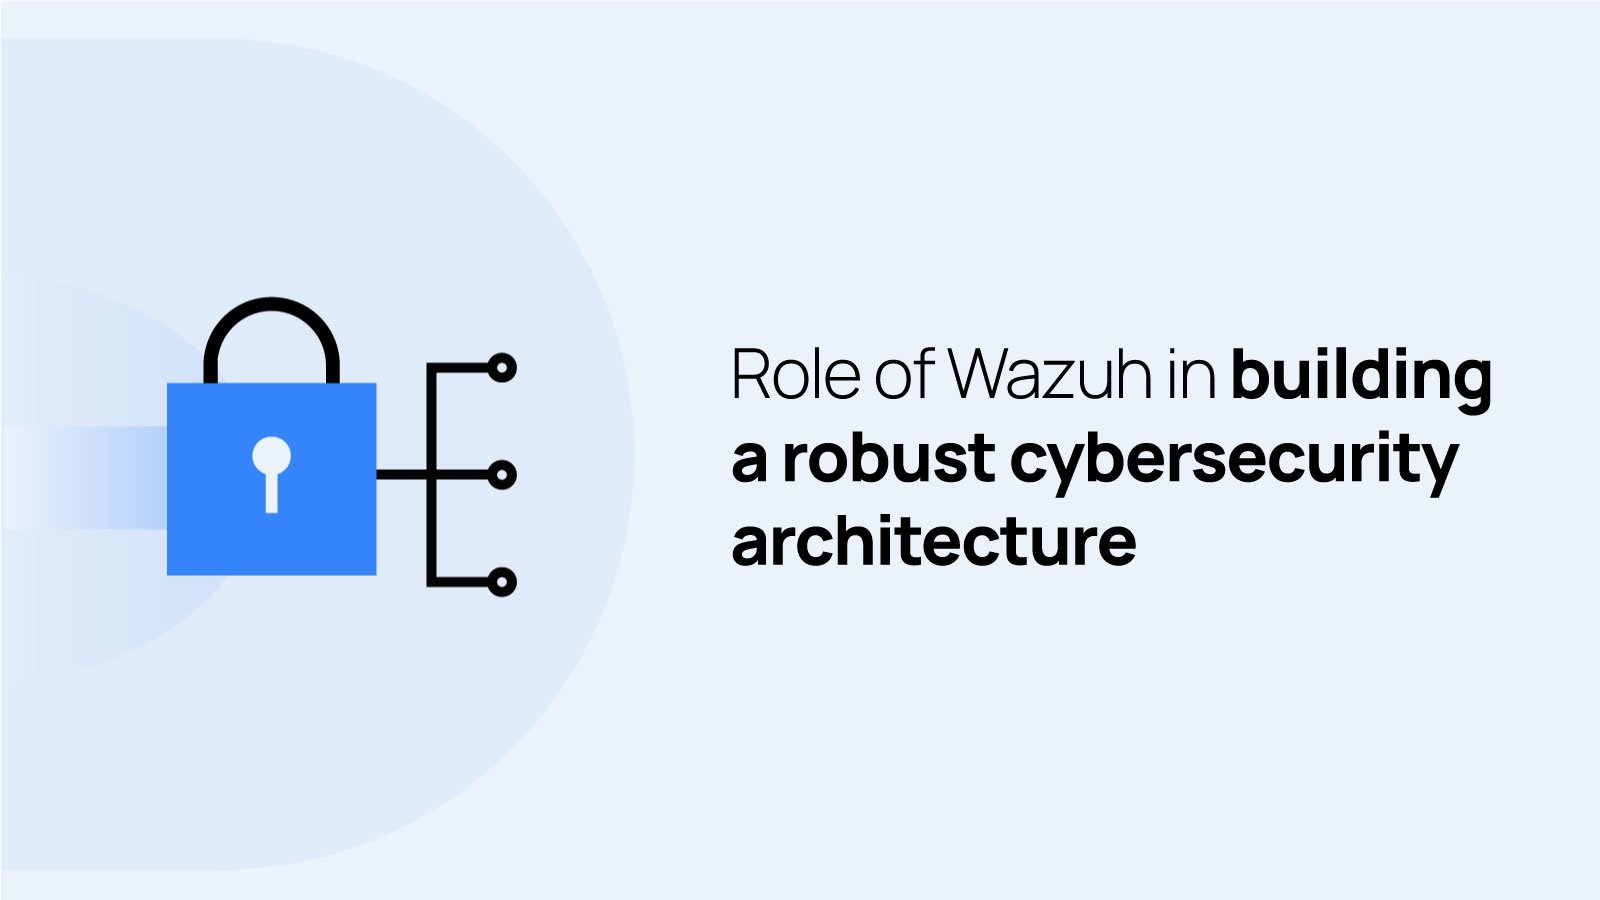 Role of Wazuh in building a robust cybersecurity architecture